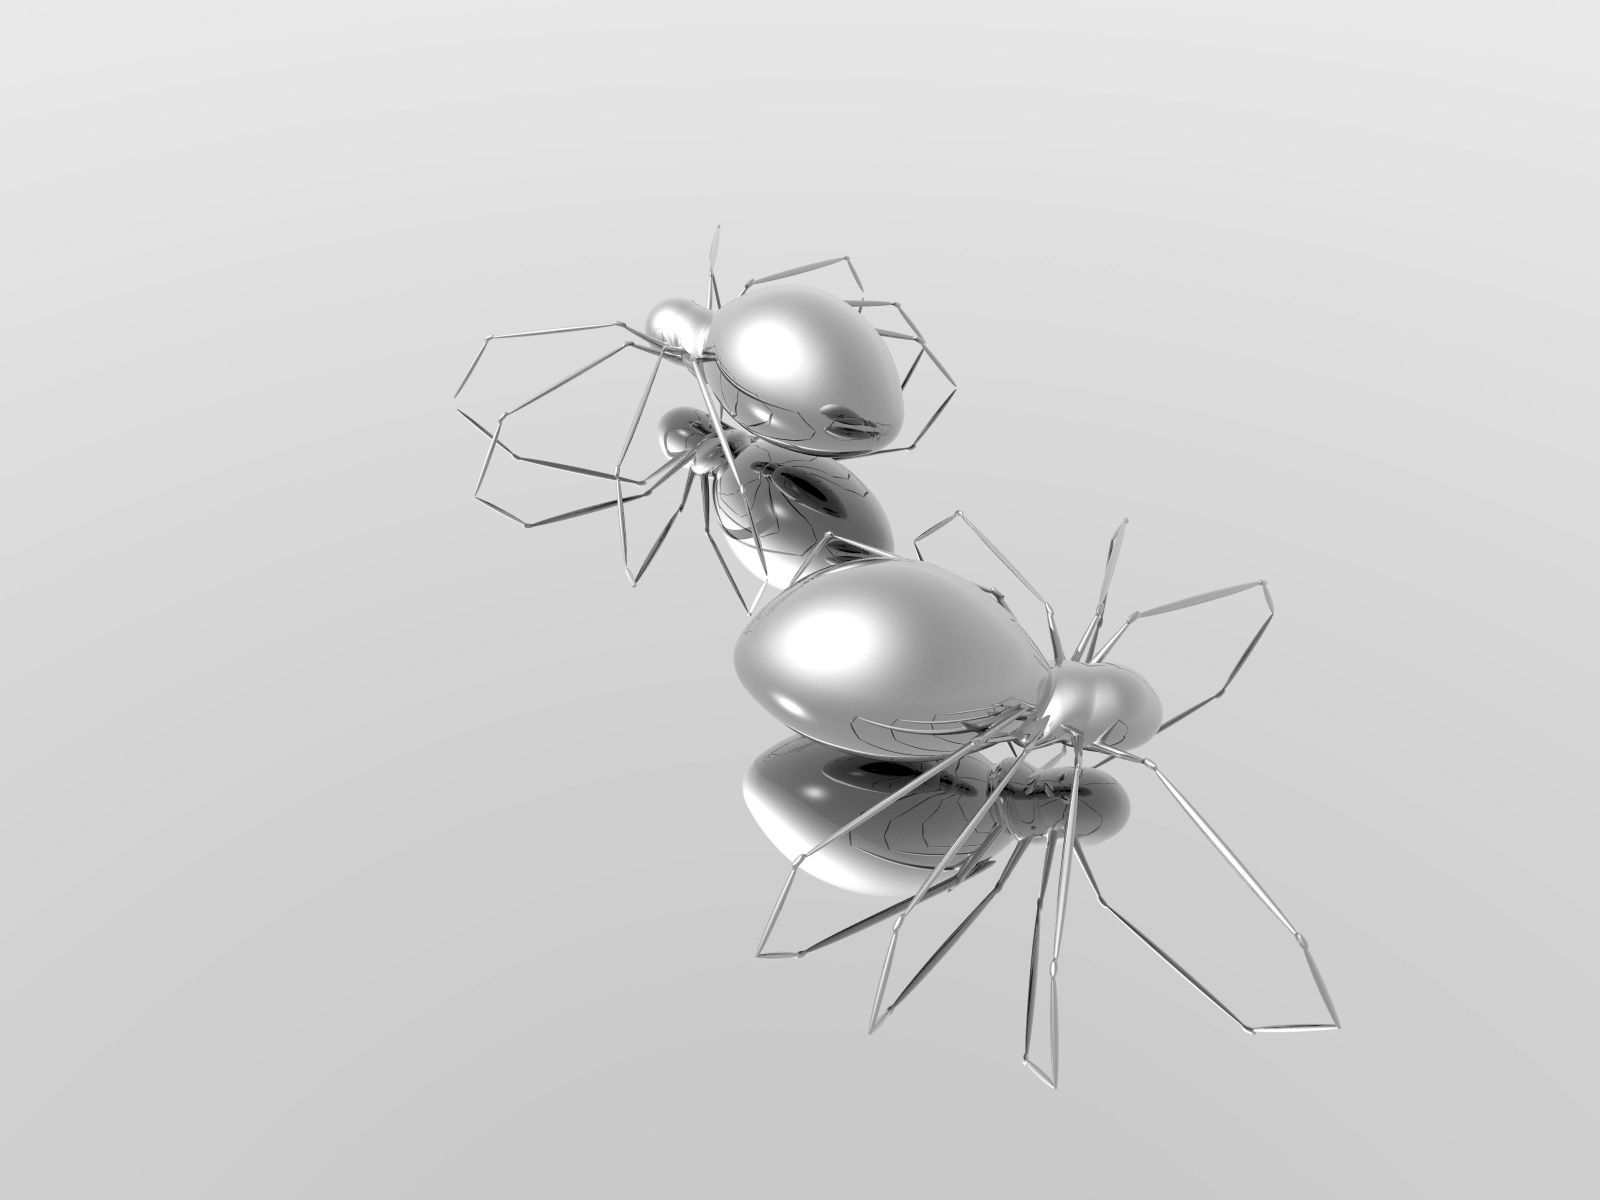 3d, surface, spiders, reflection, form, silver